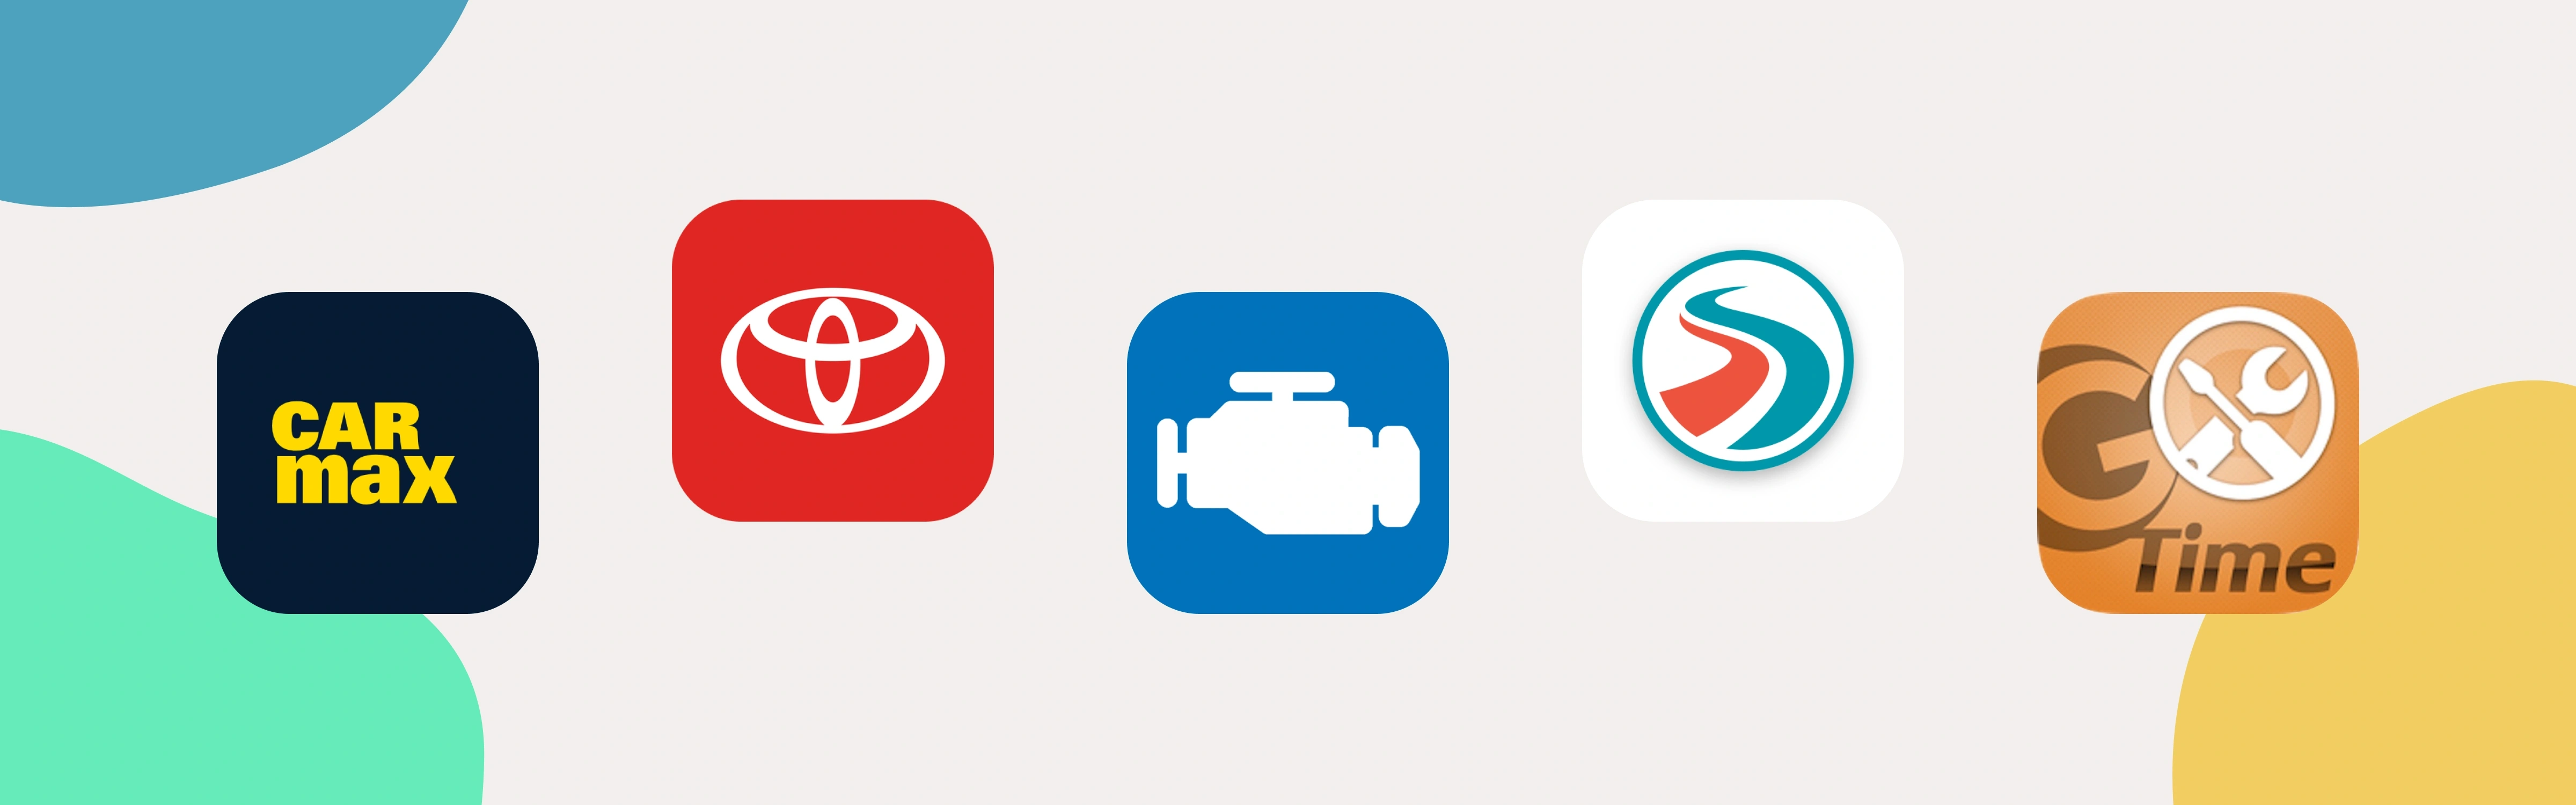 Icons of the most downloaded apps from App Store